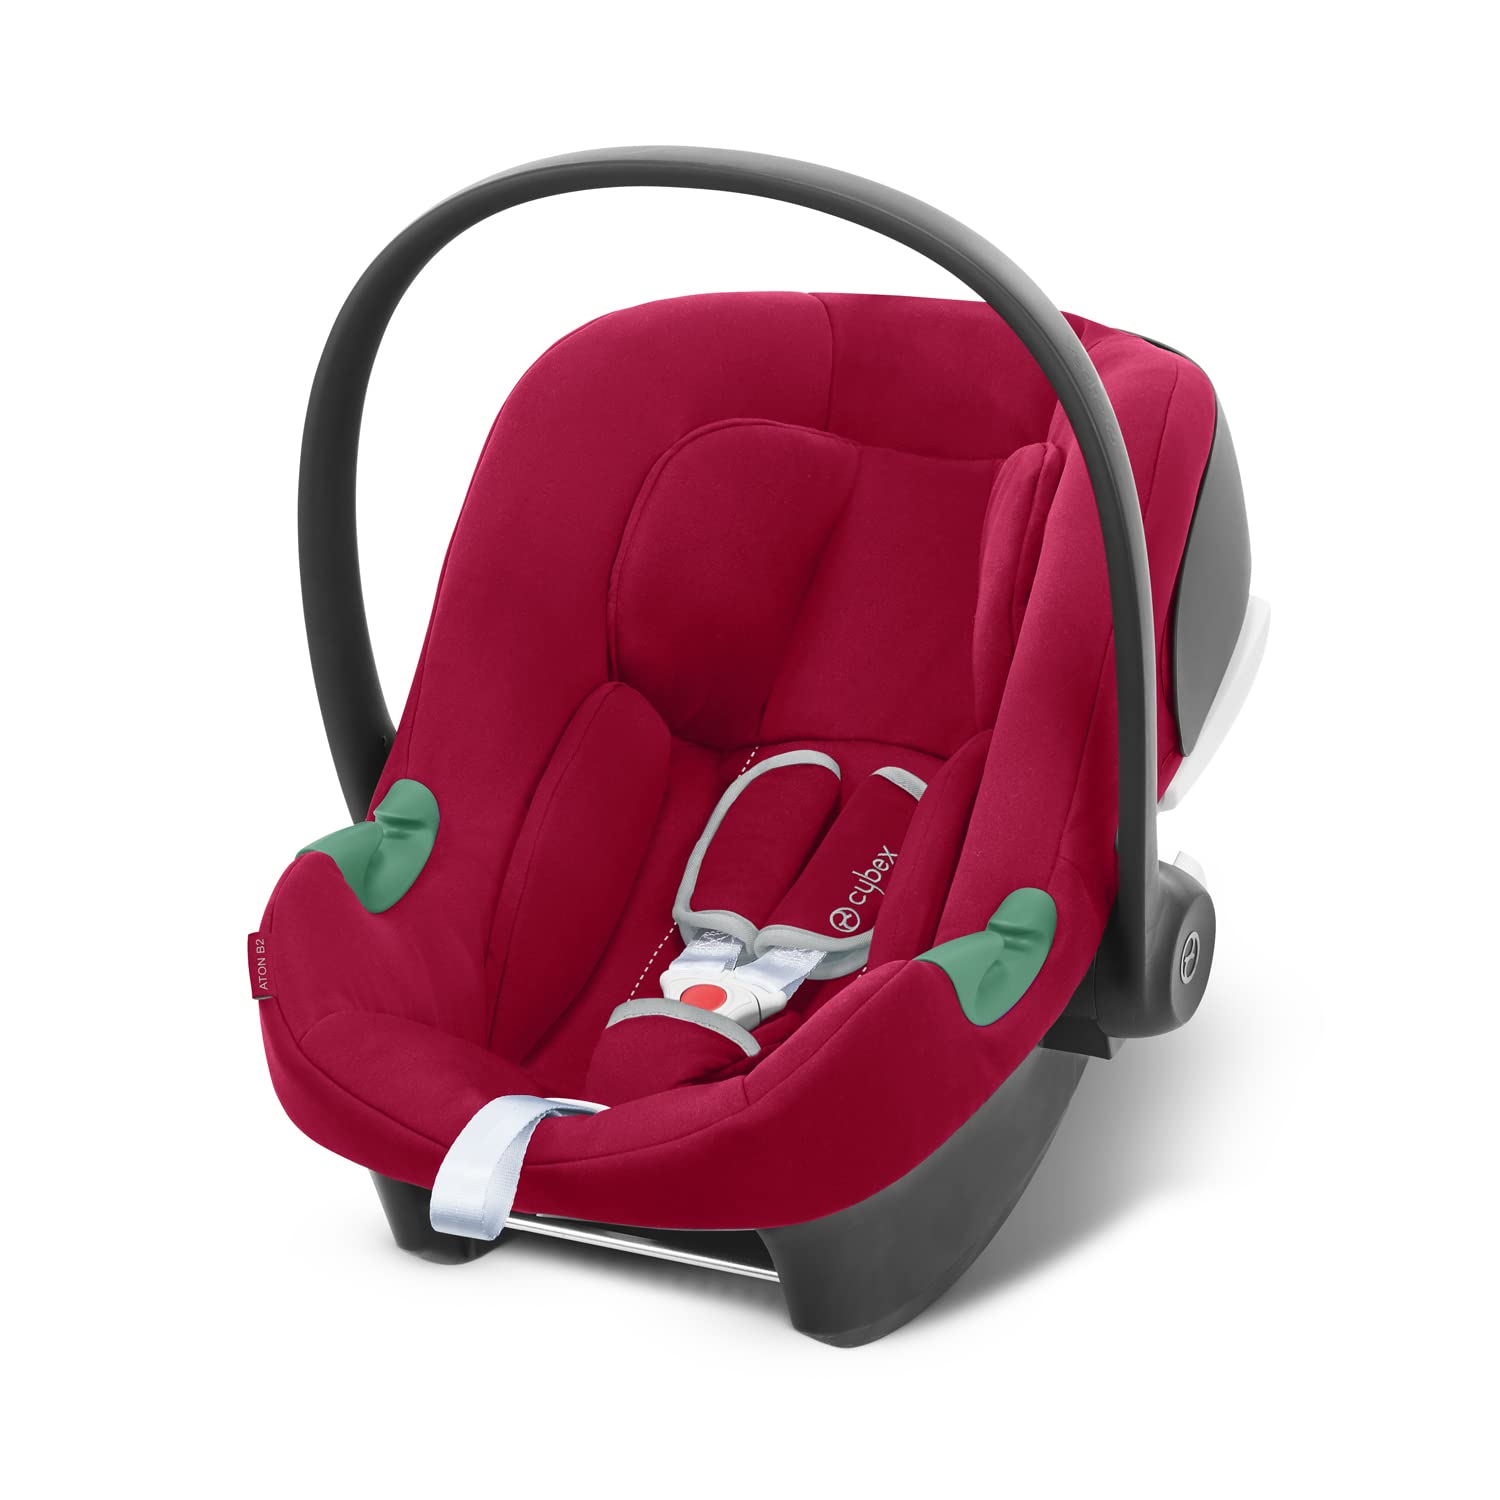 CYBEX Aton B2 i-Size Baby Car Seat from Birth to Approx. 24 Months, Max. 13 kg, Includes Newborn Insert, SensorSafe Compatible, Dynamic Red